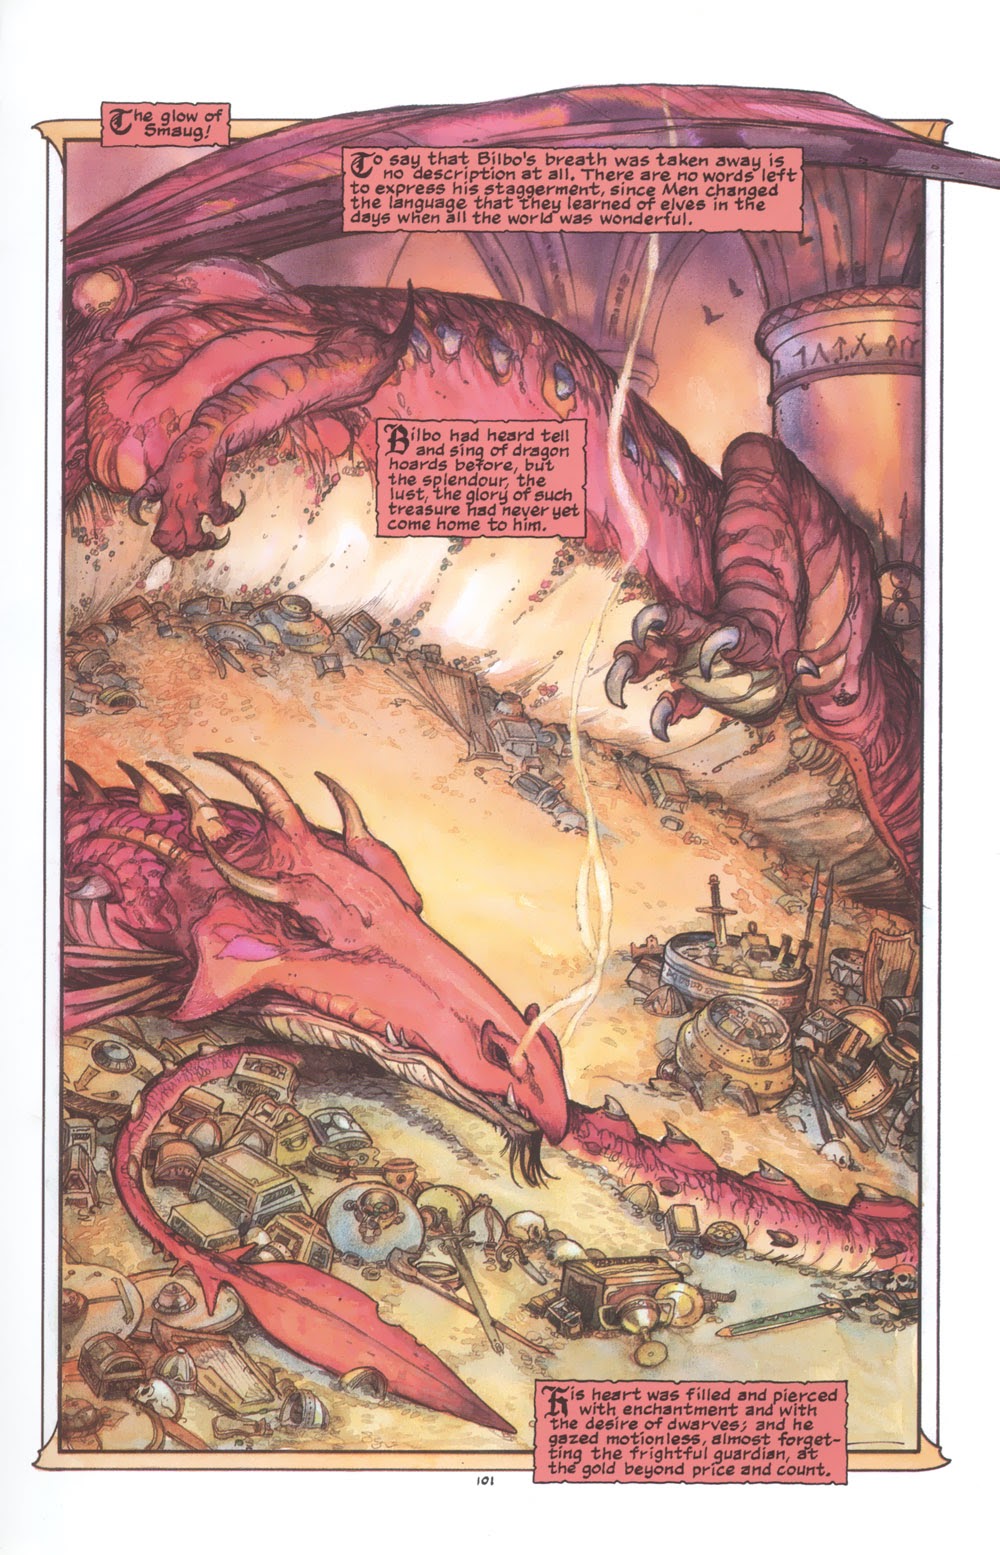 The Full Story of SMAUG!  Middle Earth Lore 